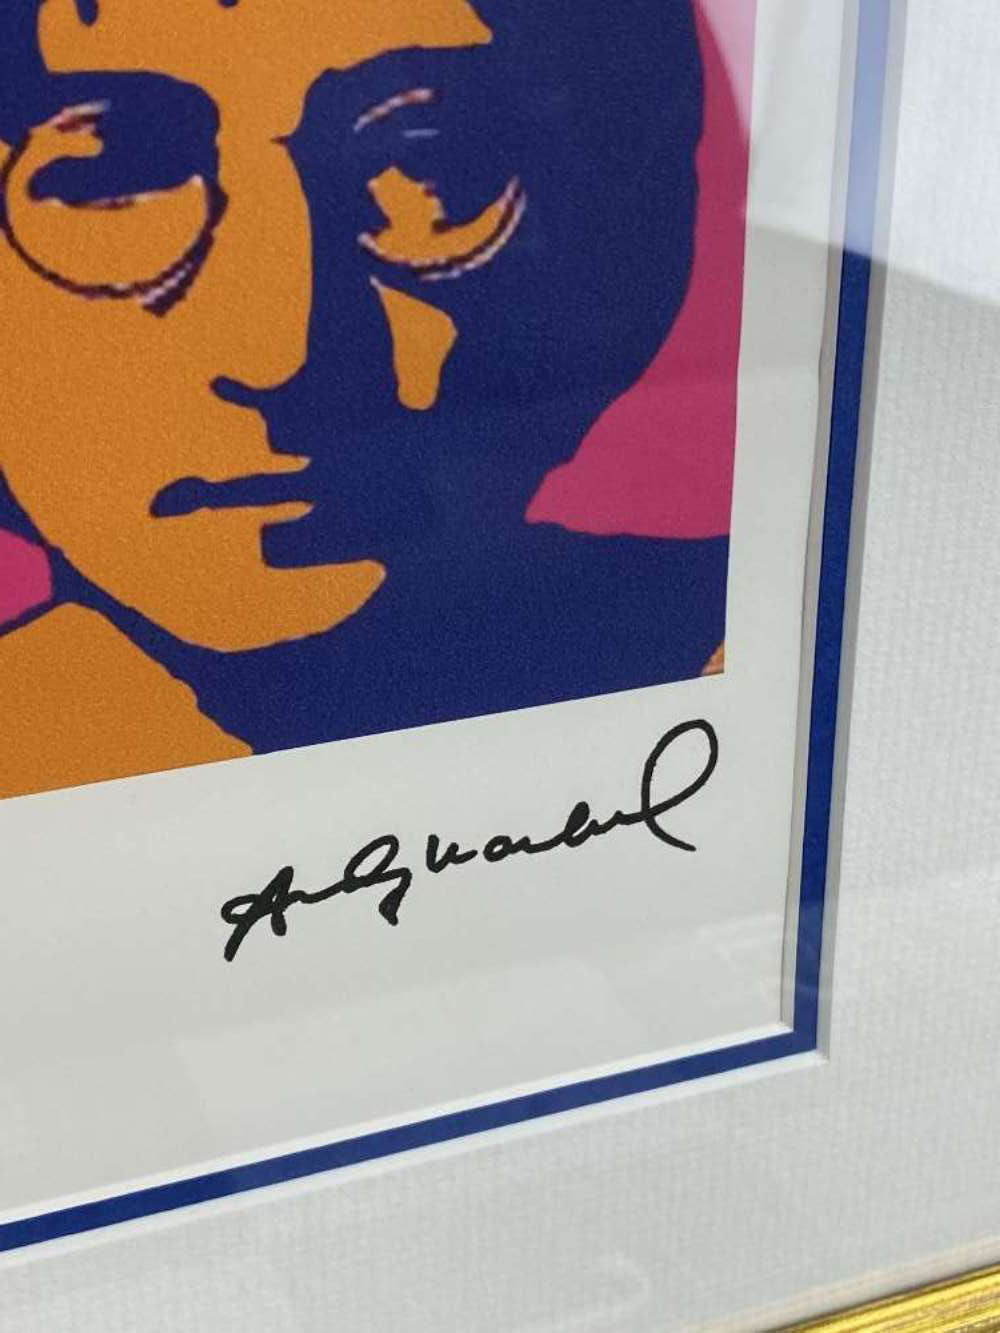 Andy Warhol-(1928-1987) "John Lennon" Castelli NY Original Numbered Lithograph #9/100, Ornate Framed - Image 2 of 5